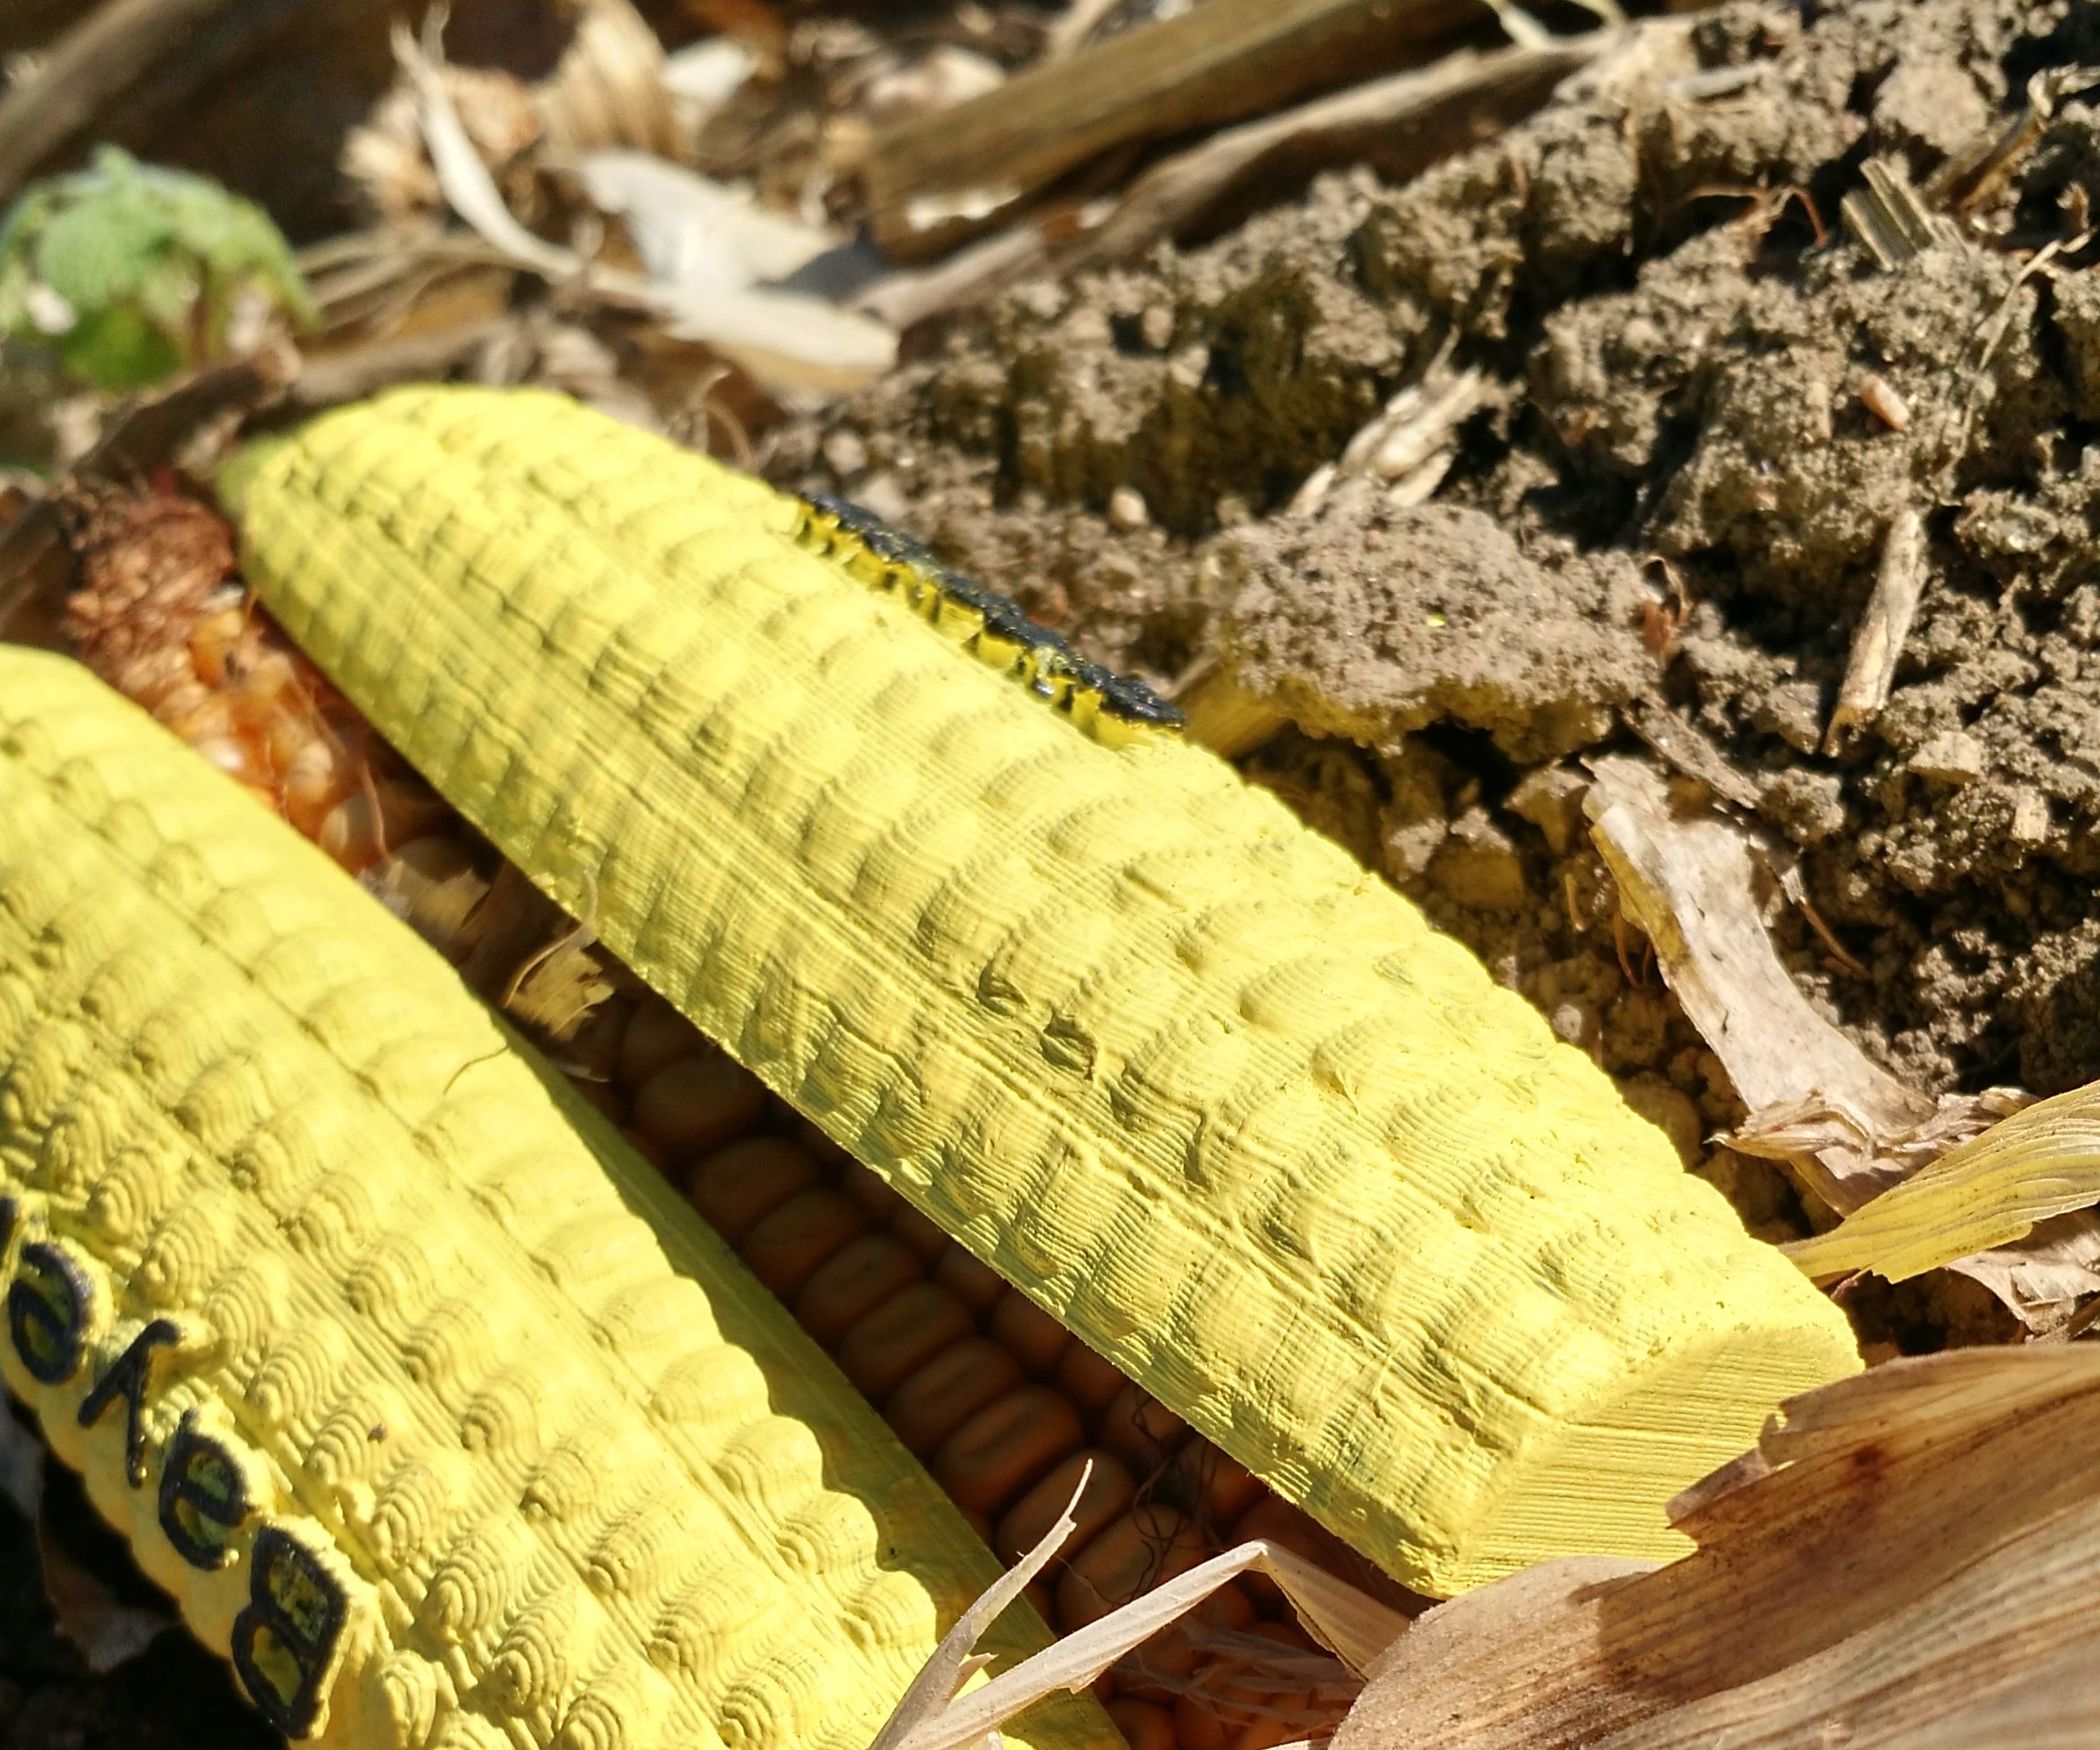 How to Make and Print a 3D Corn Cob With Spikes